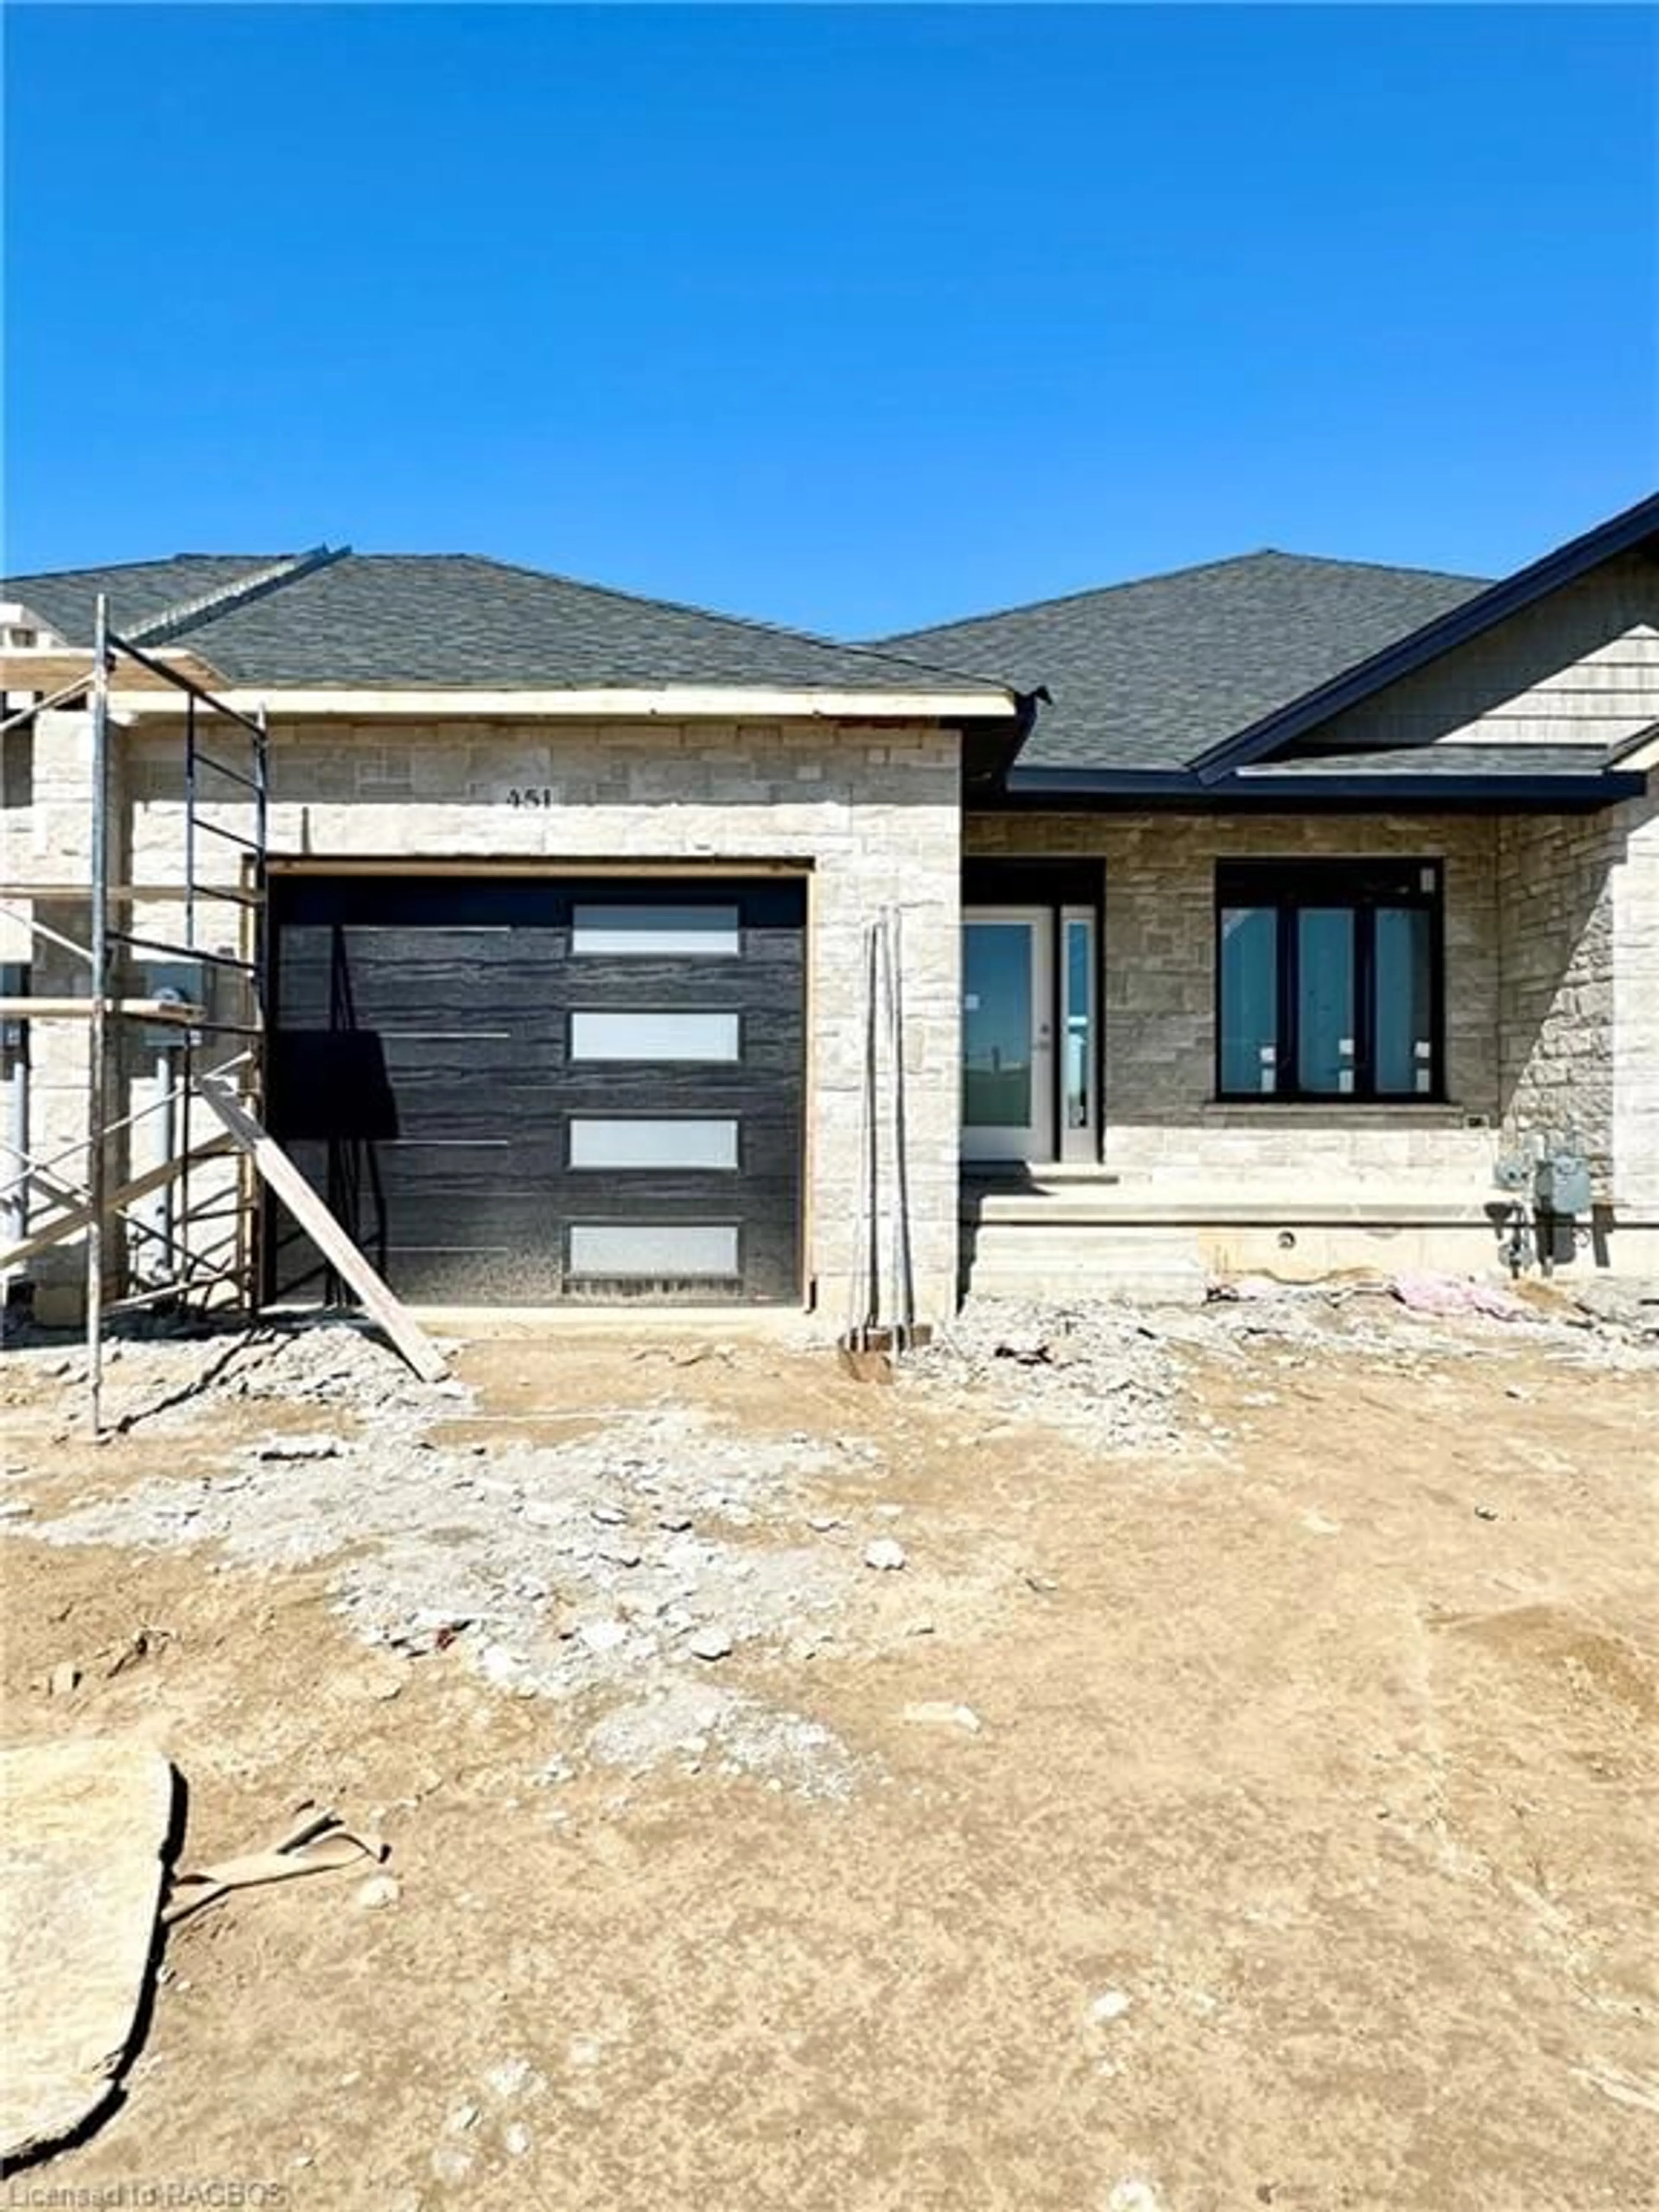 Home with brick exterior material for 451 Ivings Dr, Port Elgin Ontario N0H 2C3